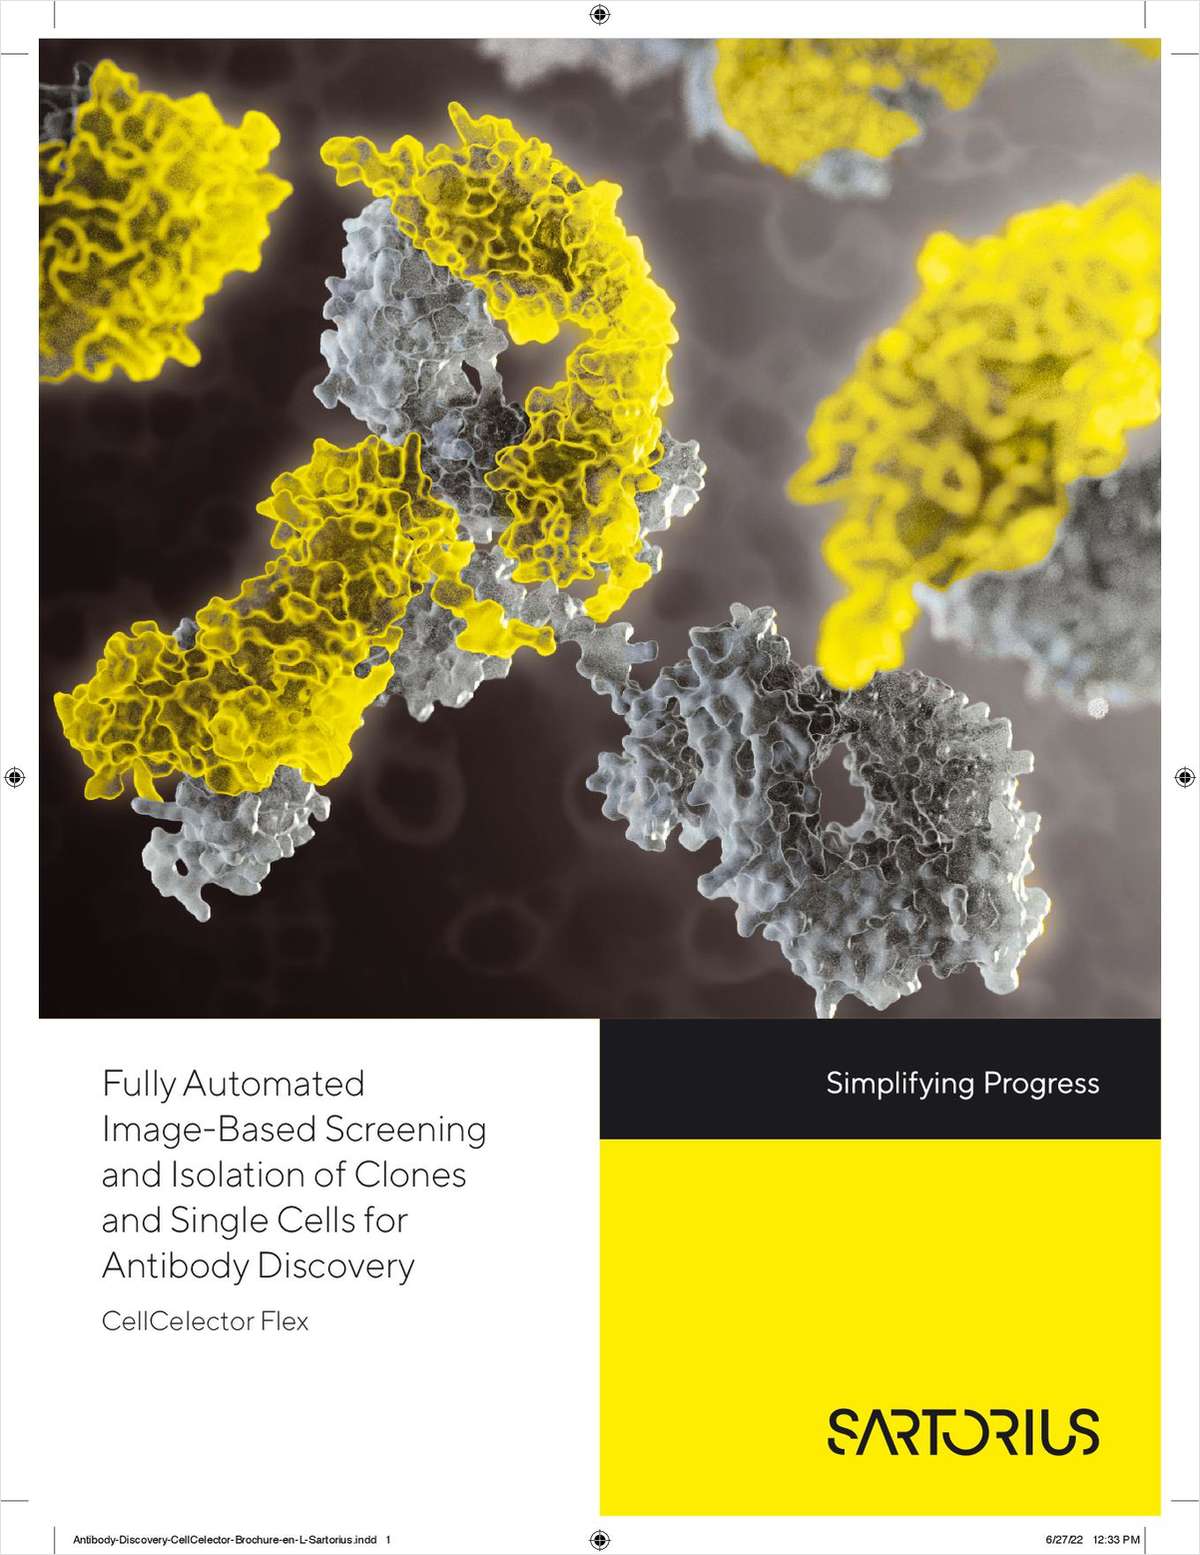 Fully Automated Image-Based Screening and Isolation of Clones and Single Cells for Antibody Discovery